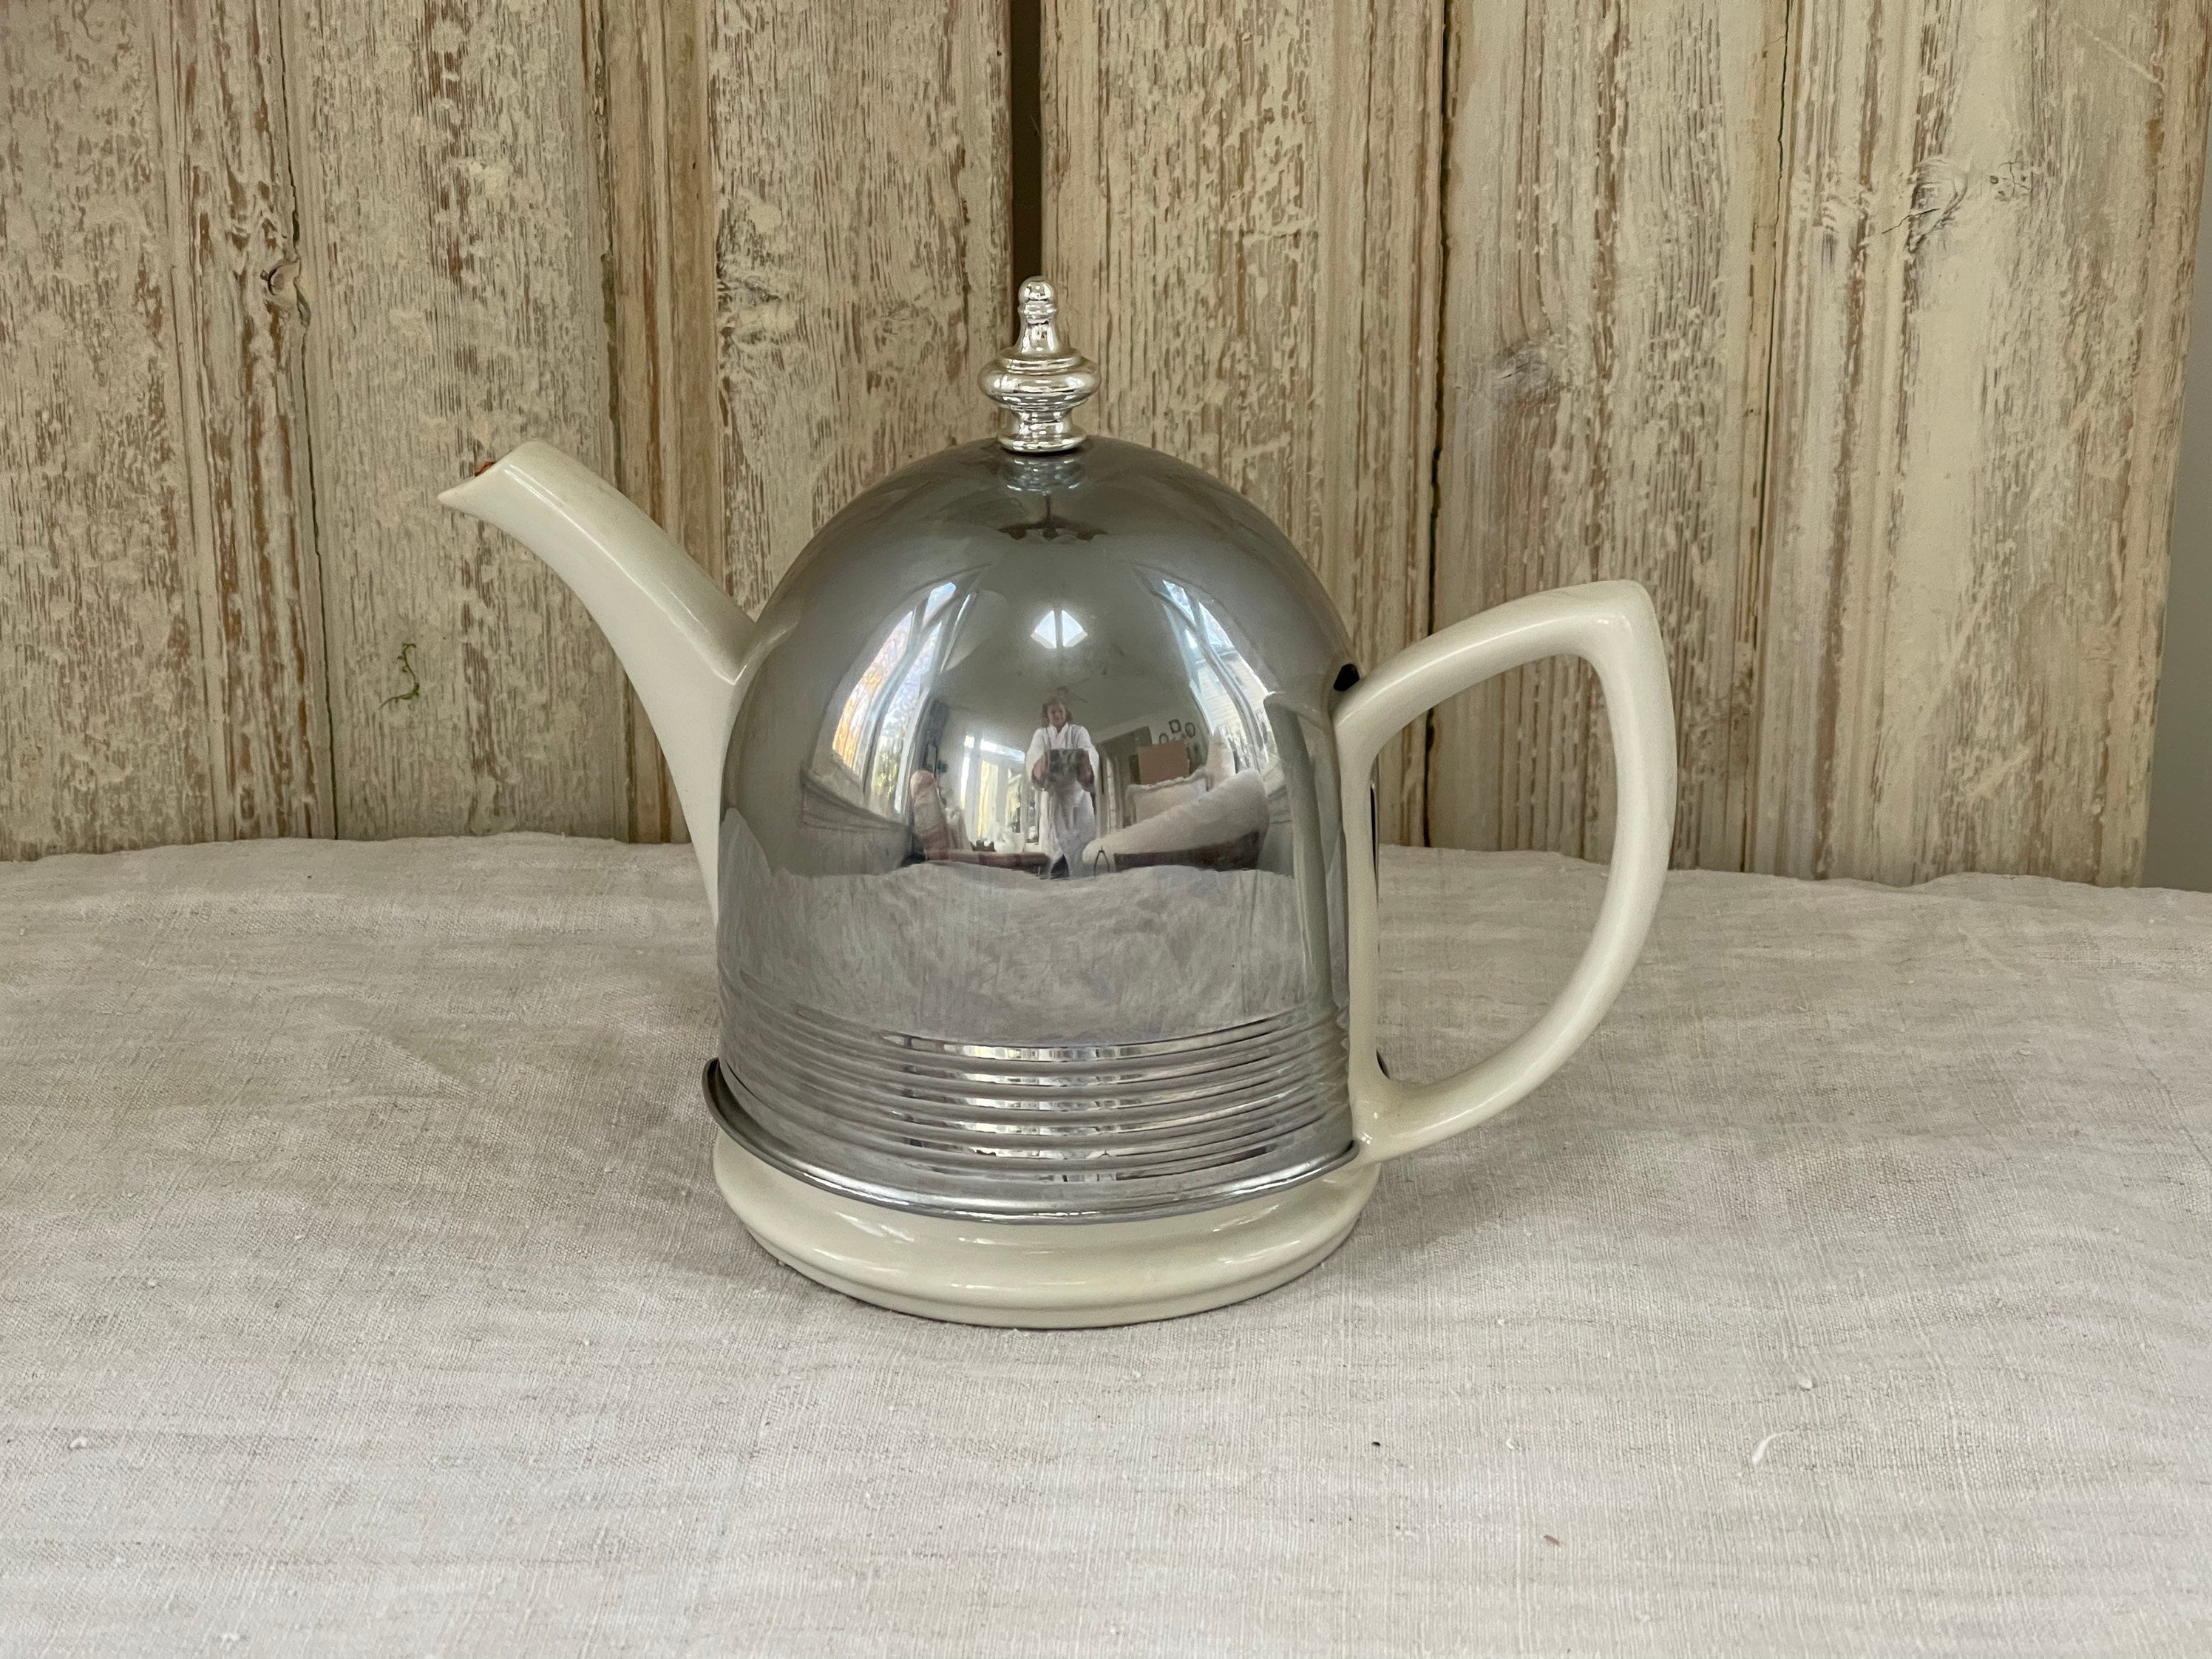 Vintage Ceramic Black Teapot with Gold Metal Insulated Cozy Cover Kettle